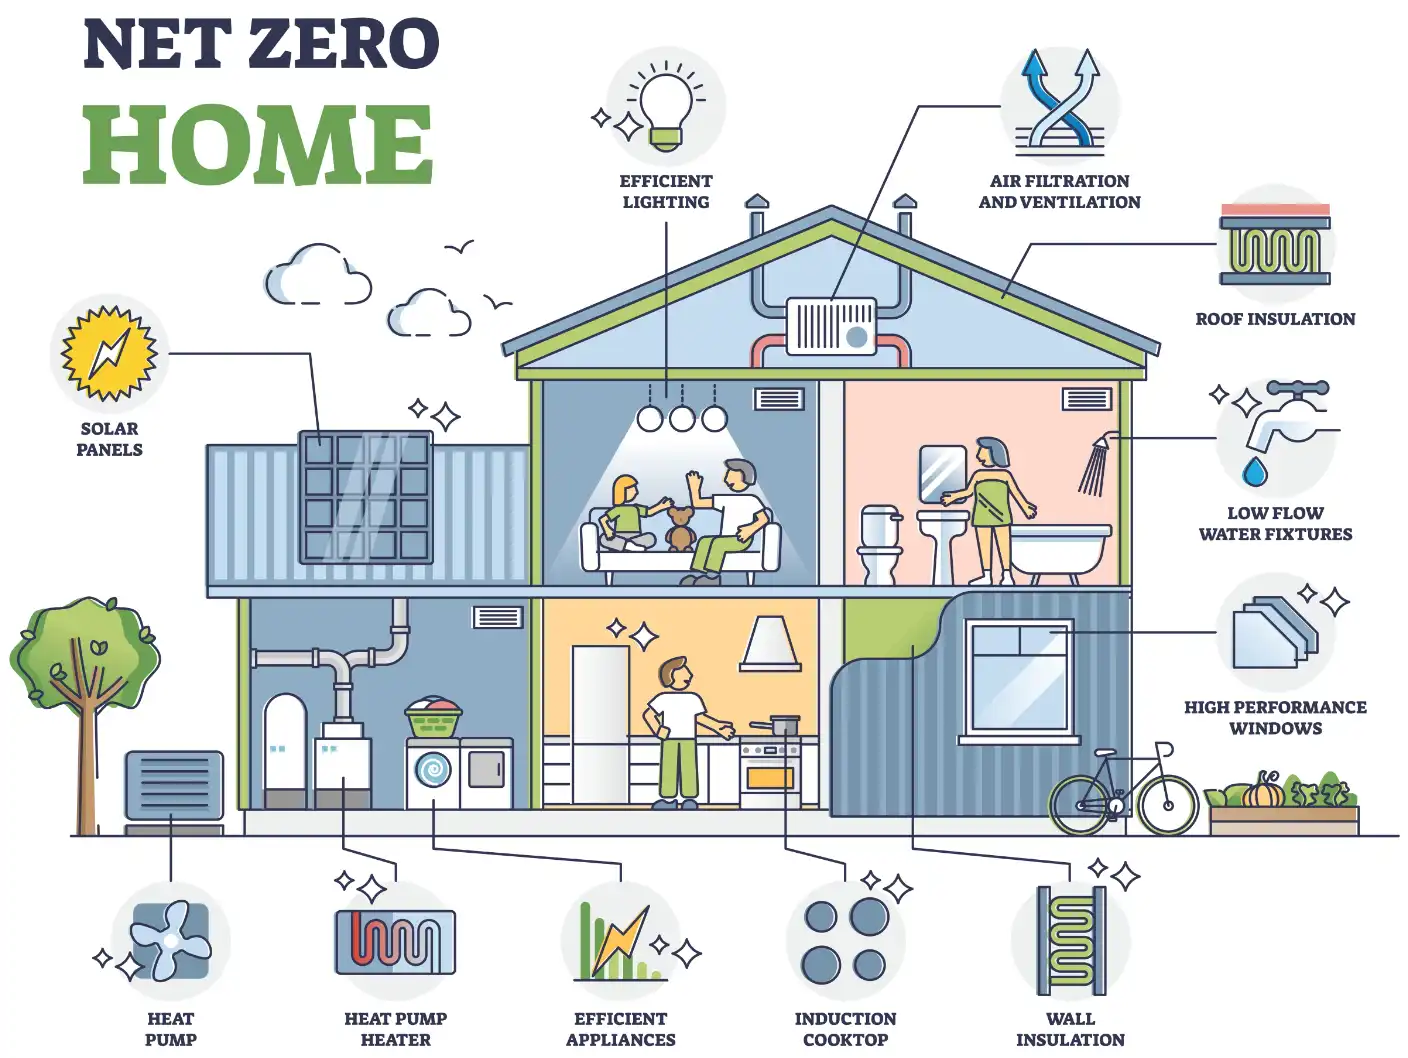 Illustration of a 'Net Zero Home' showcasing various sustainable features like solar panels, a heat pump, efficient lighting, air filtration, roof insulation, low flow water fixtures, high performance windows, an induction cooktop, and wall insulation, all designed to optimize energy efficiency.